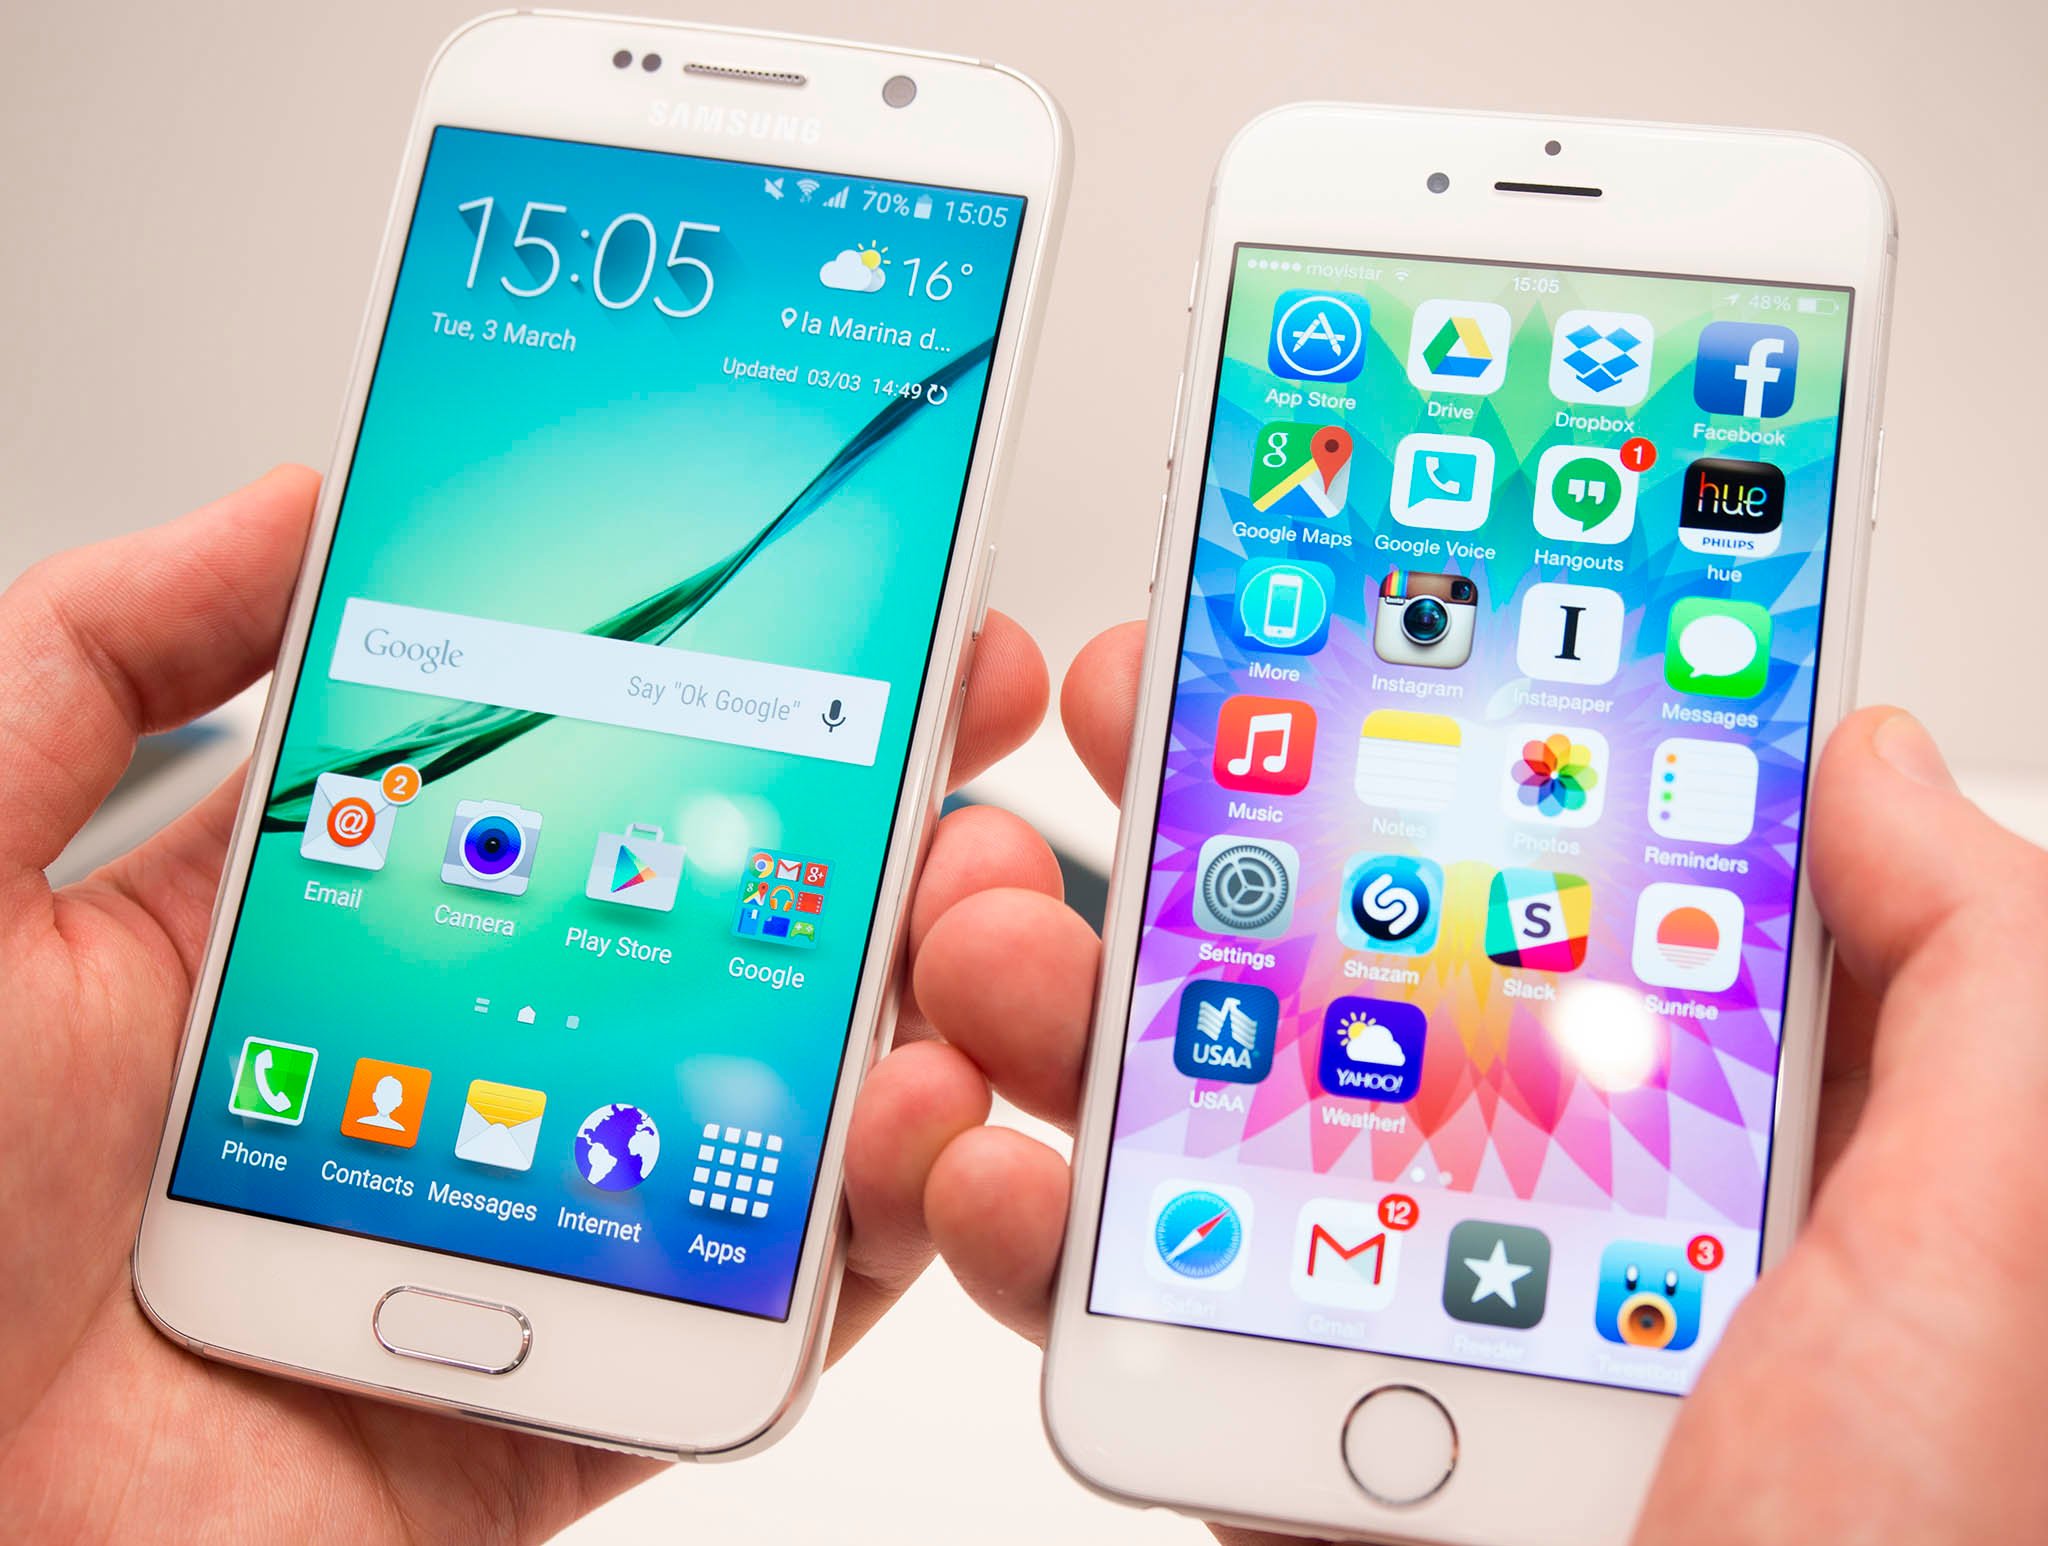 Samsung Galaxy S6 and iPhone 6